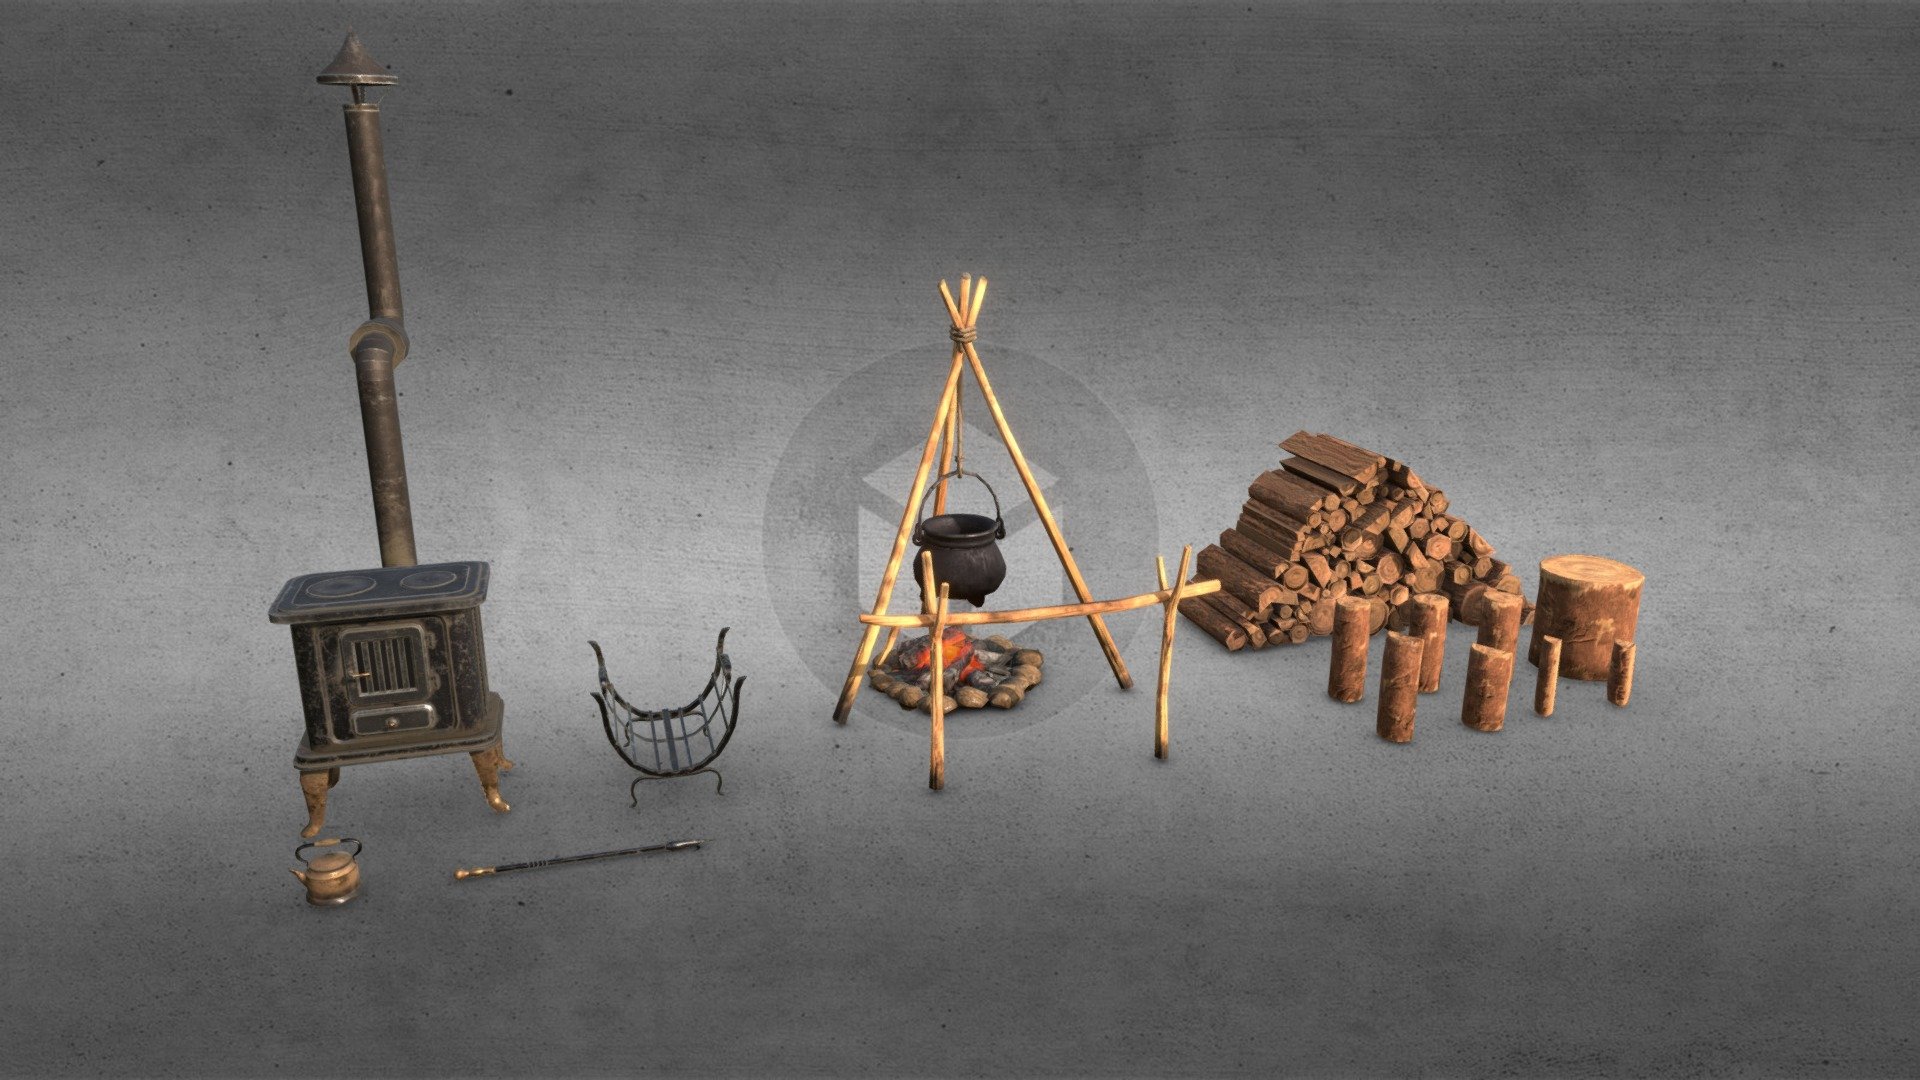 Introducing various fire and cooking pack, set of 12 props:

Features:




Wood burning stove with chimney

Metal firewood basket

Fire poker

Kettle

Camp fire

Wooden cooking tripod with rope

Wooden roasting spit

Cauldron with handle

Pile of firewood

3 logs

4 split logs

Wood splitting base

For support or other information please send us an e-mail at info@sunbox.games

Check out our other work at sunbox.games - Fire & Cooking - Stove, Logs, Kettle, Cauldron - Buy Royalty Free 3D model by Sunbox Games (@sunboxgames) 3d model